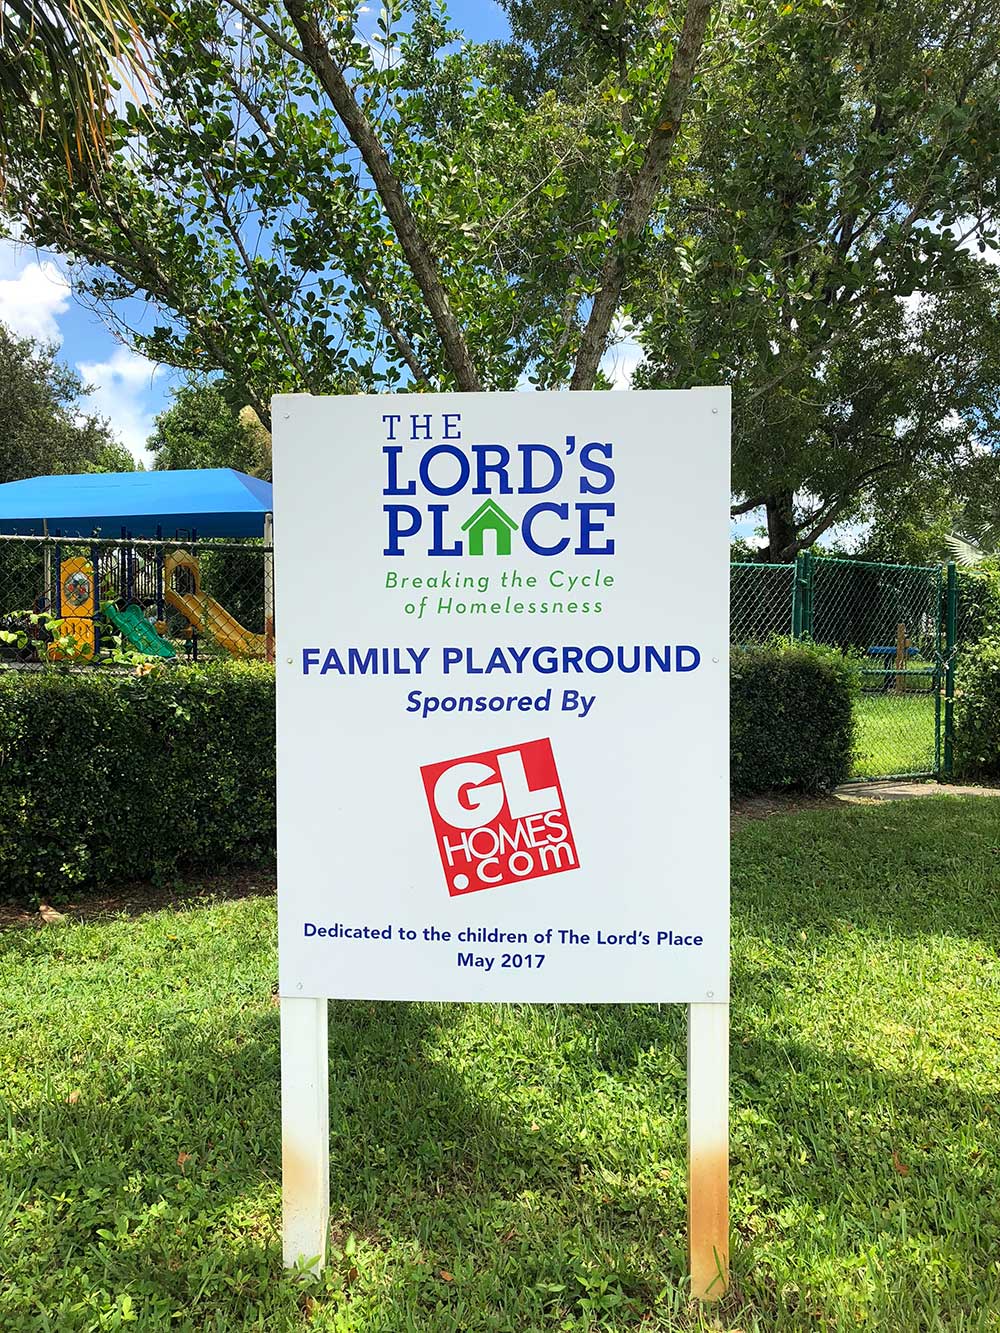 The Lord's Place displays a billboard for their playground.